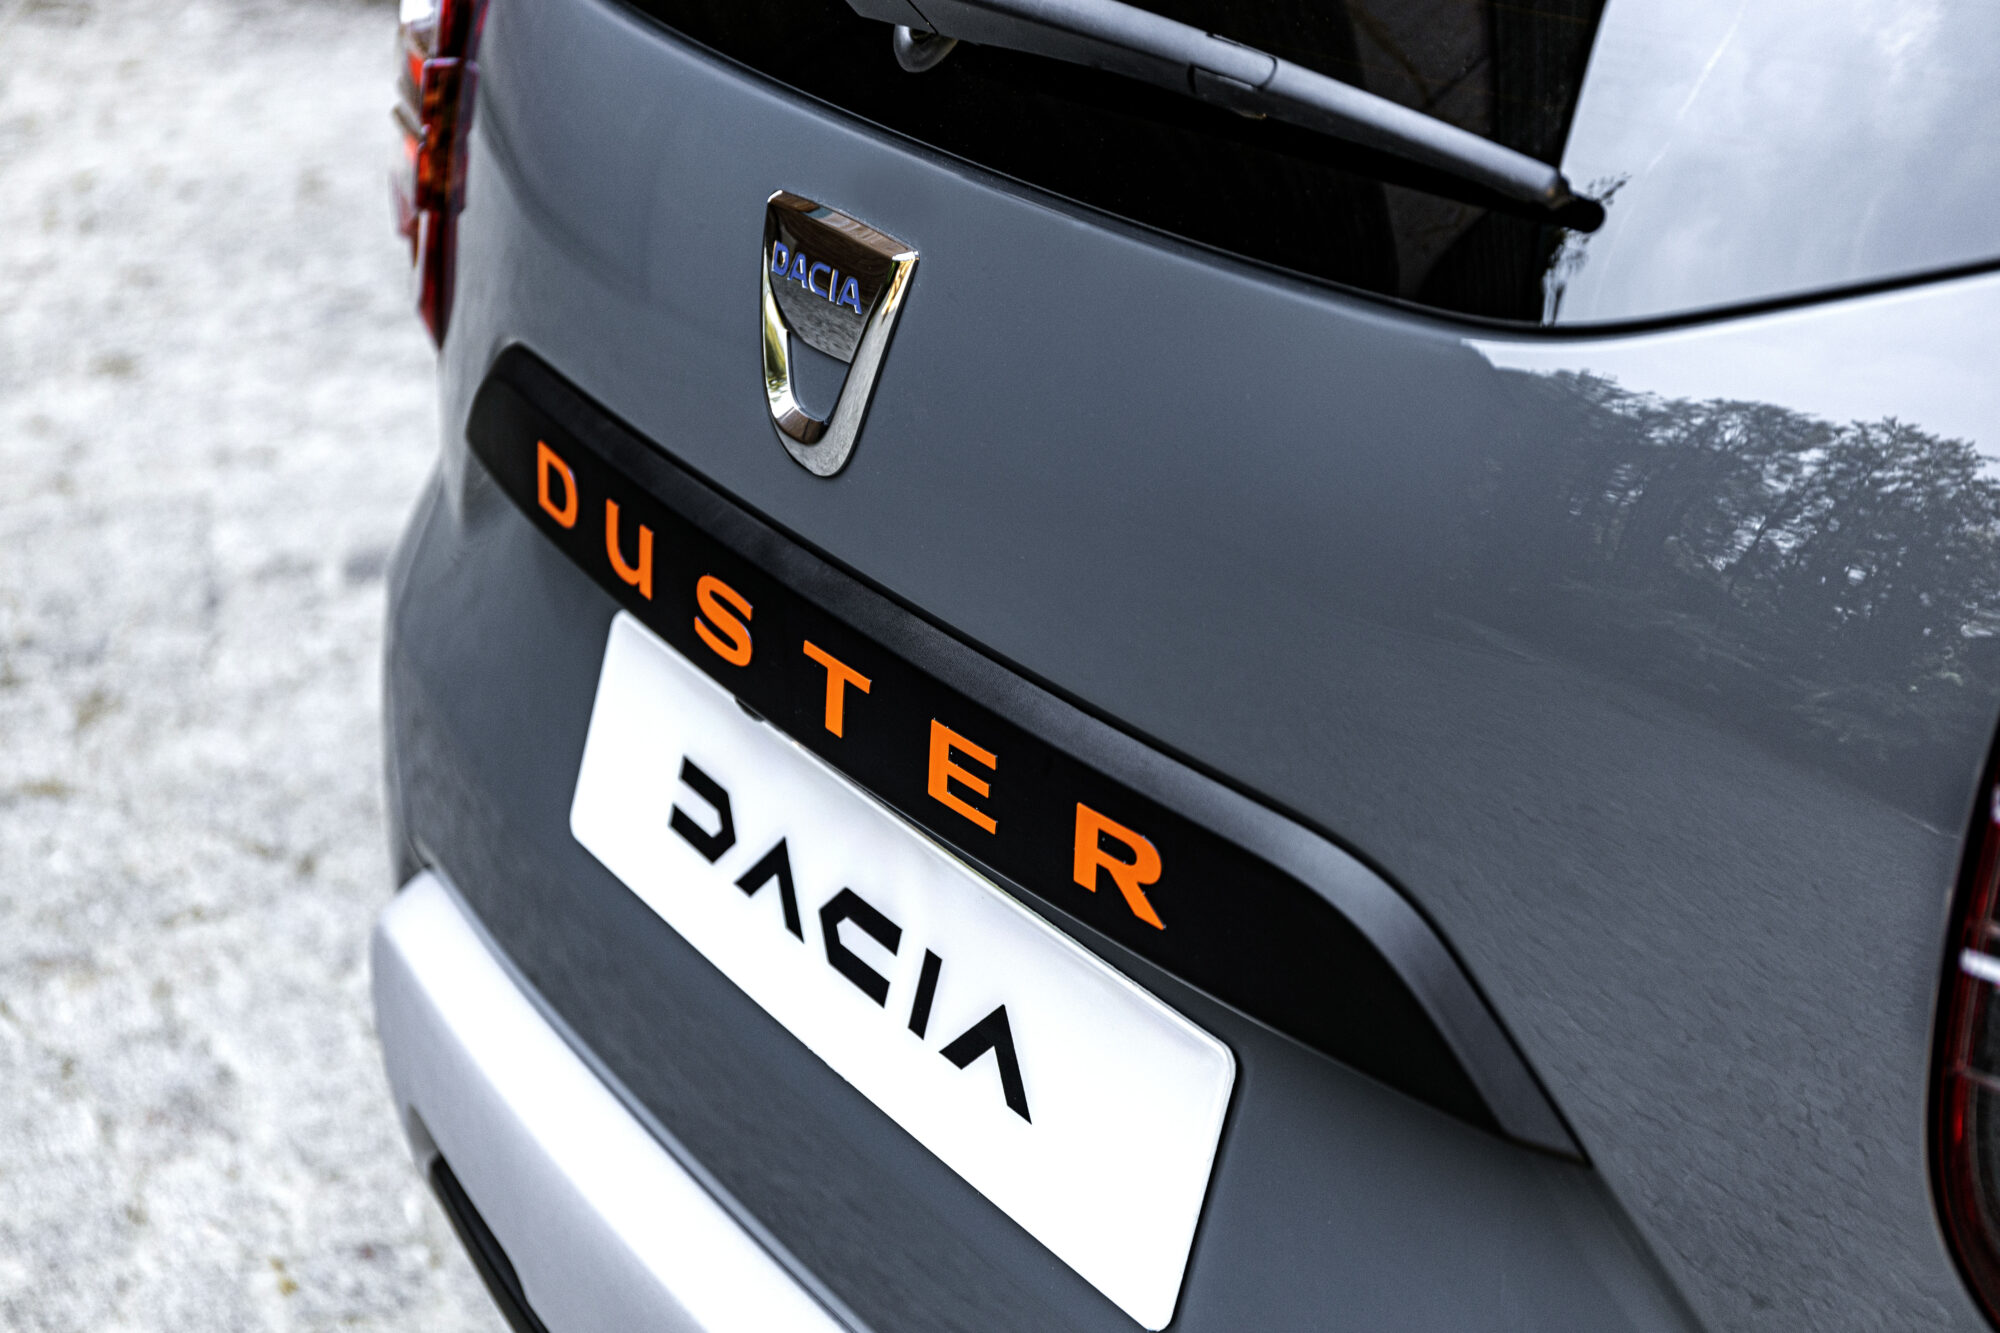 2021 - New Dacia Duster Extreme Limited Edition